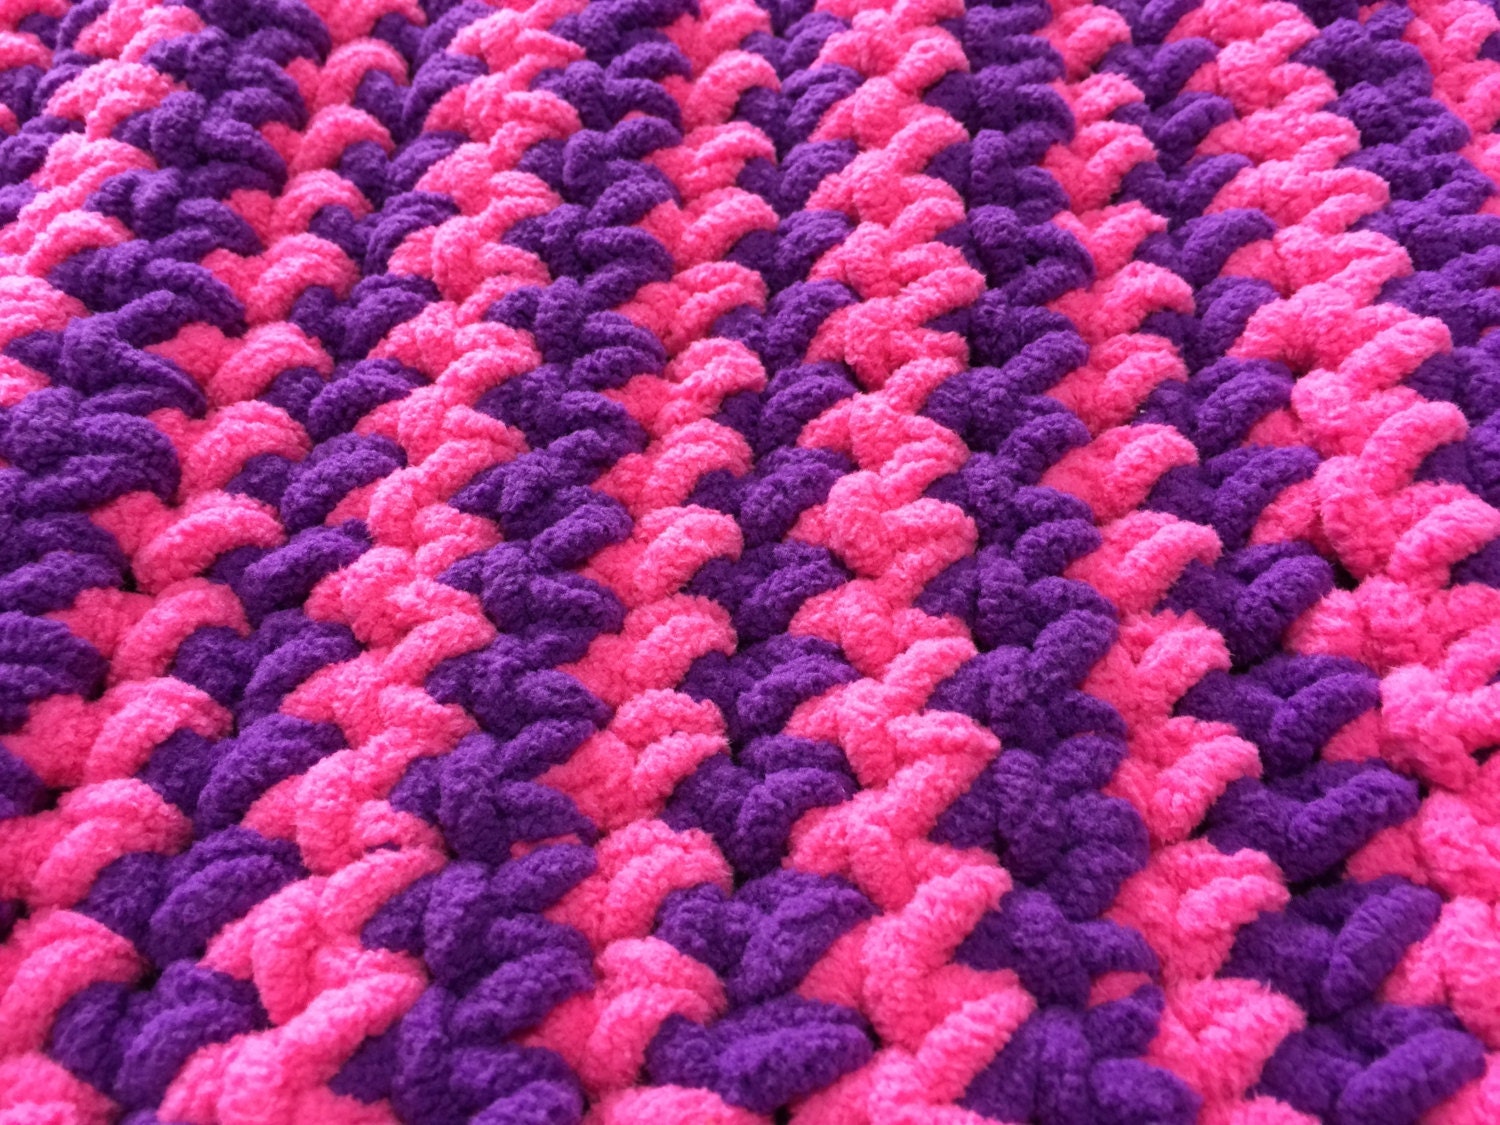 Pink and Purple Crocheted Blanket Sz 50x 36